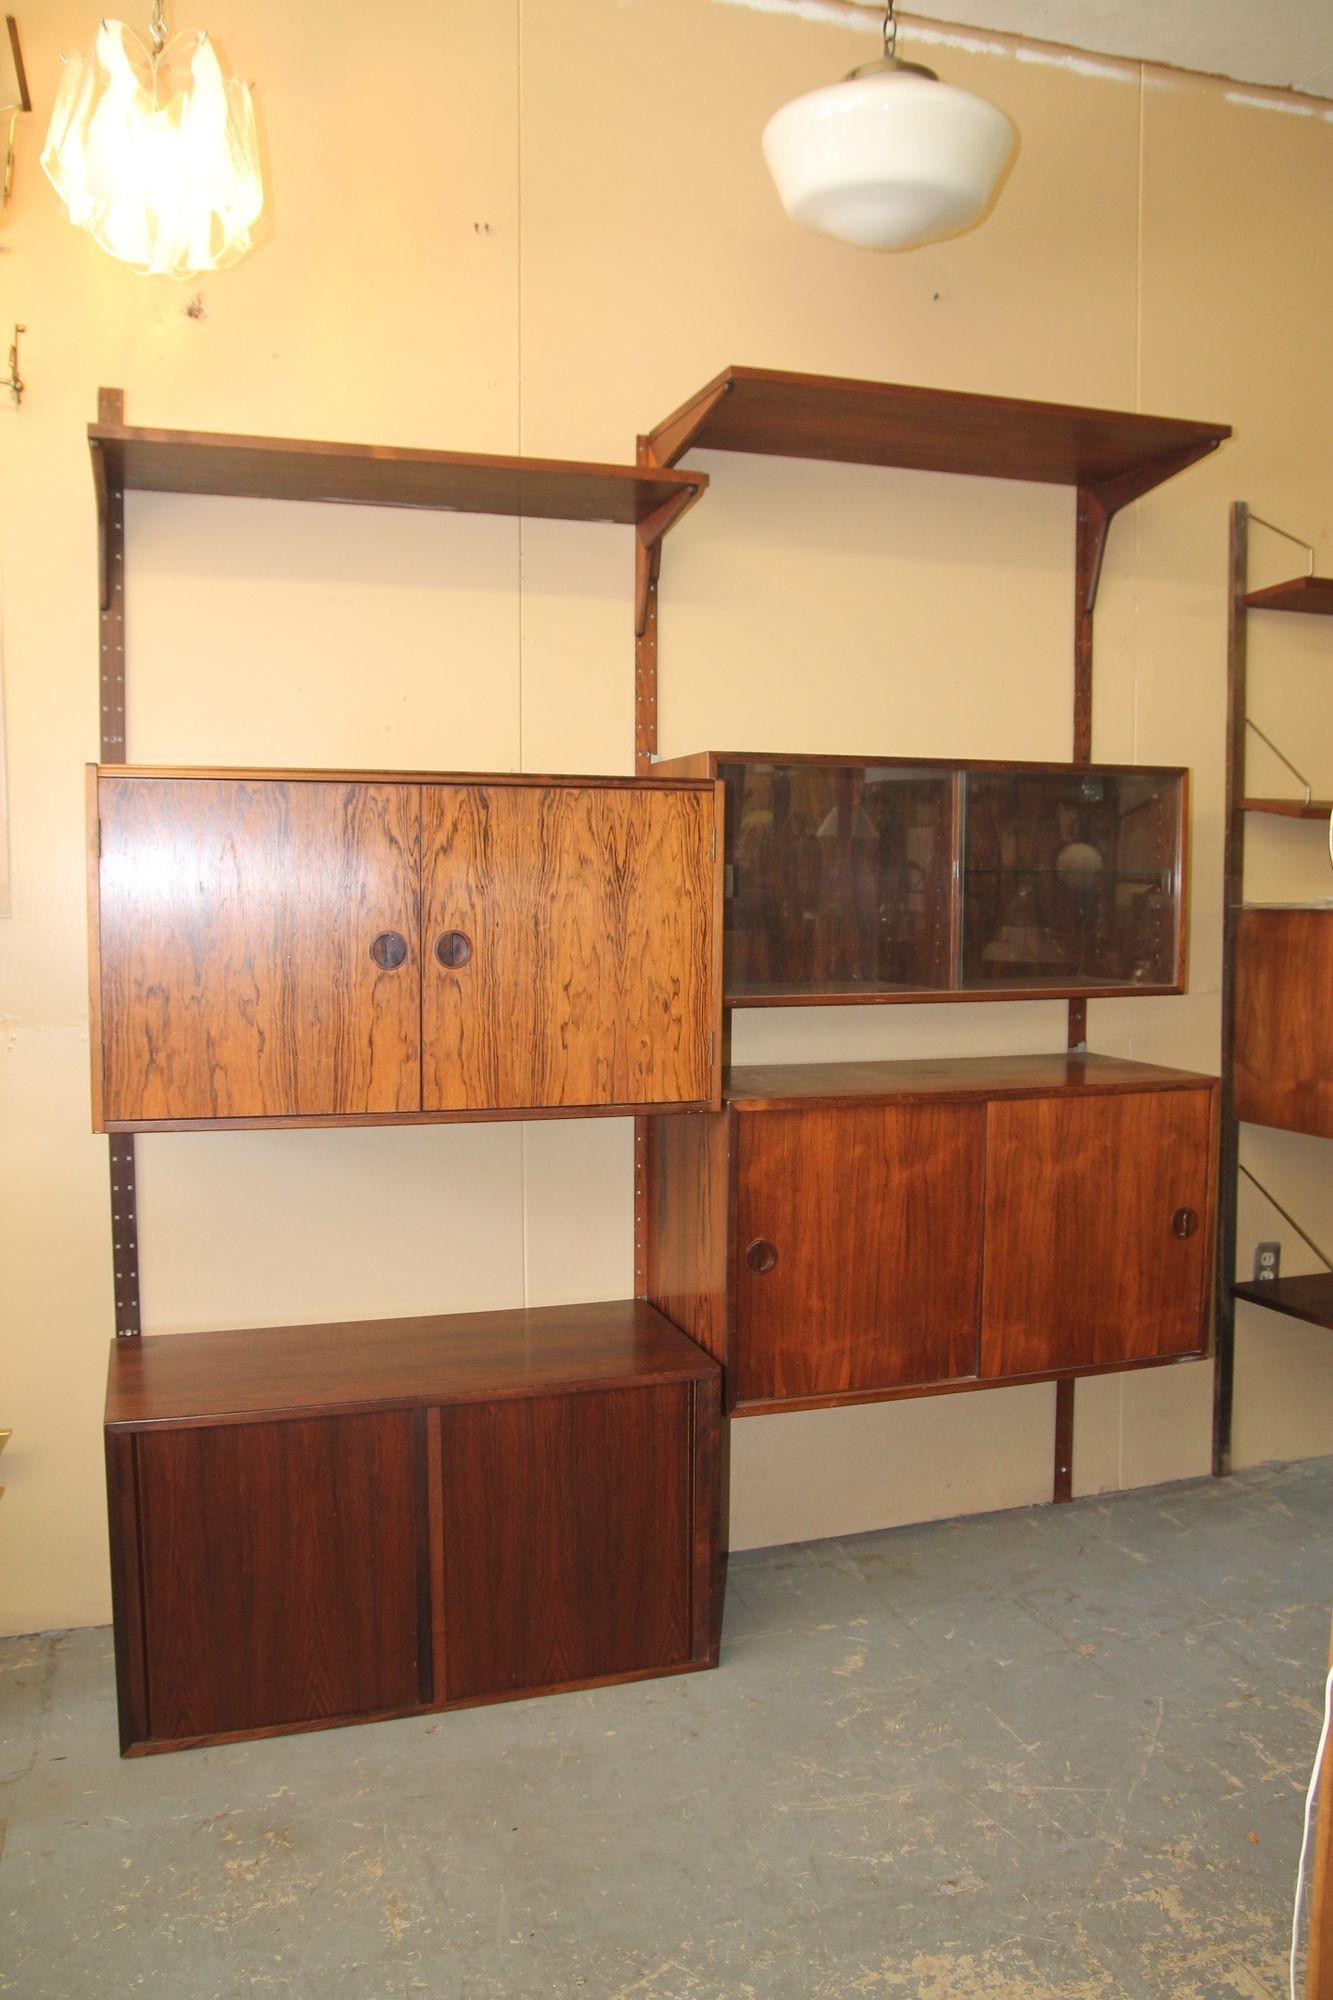 Pleased to offer this great two bay rosewood Cado wall unit.  Set includes 2 shelves ( 12 x 35 1/4 and 16 x 35 1/4), cabinet that opens from top and front, cabinet with glass sliding doors and one glass shelf, sliding door cabinet with 2 shelves and